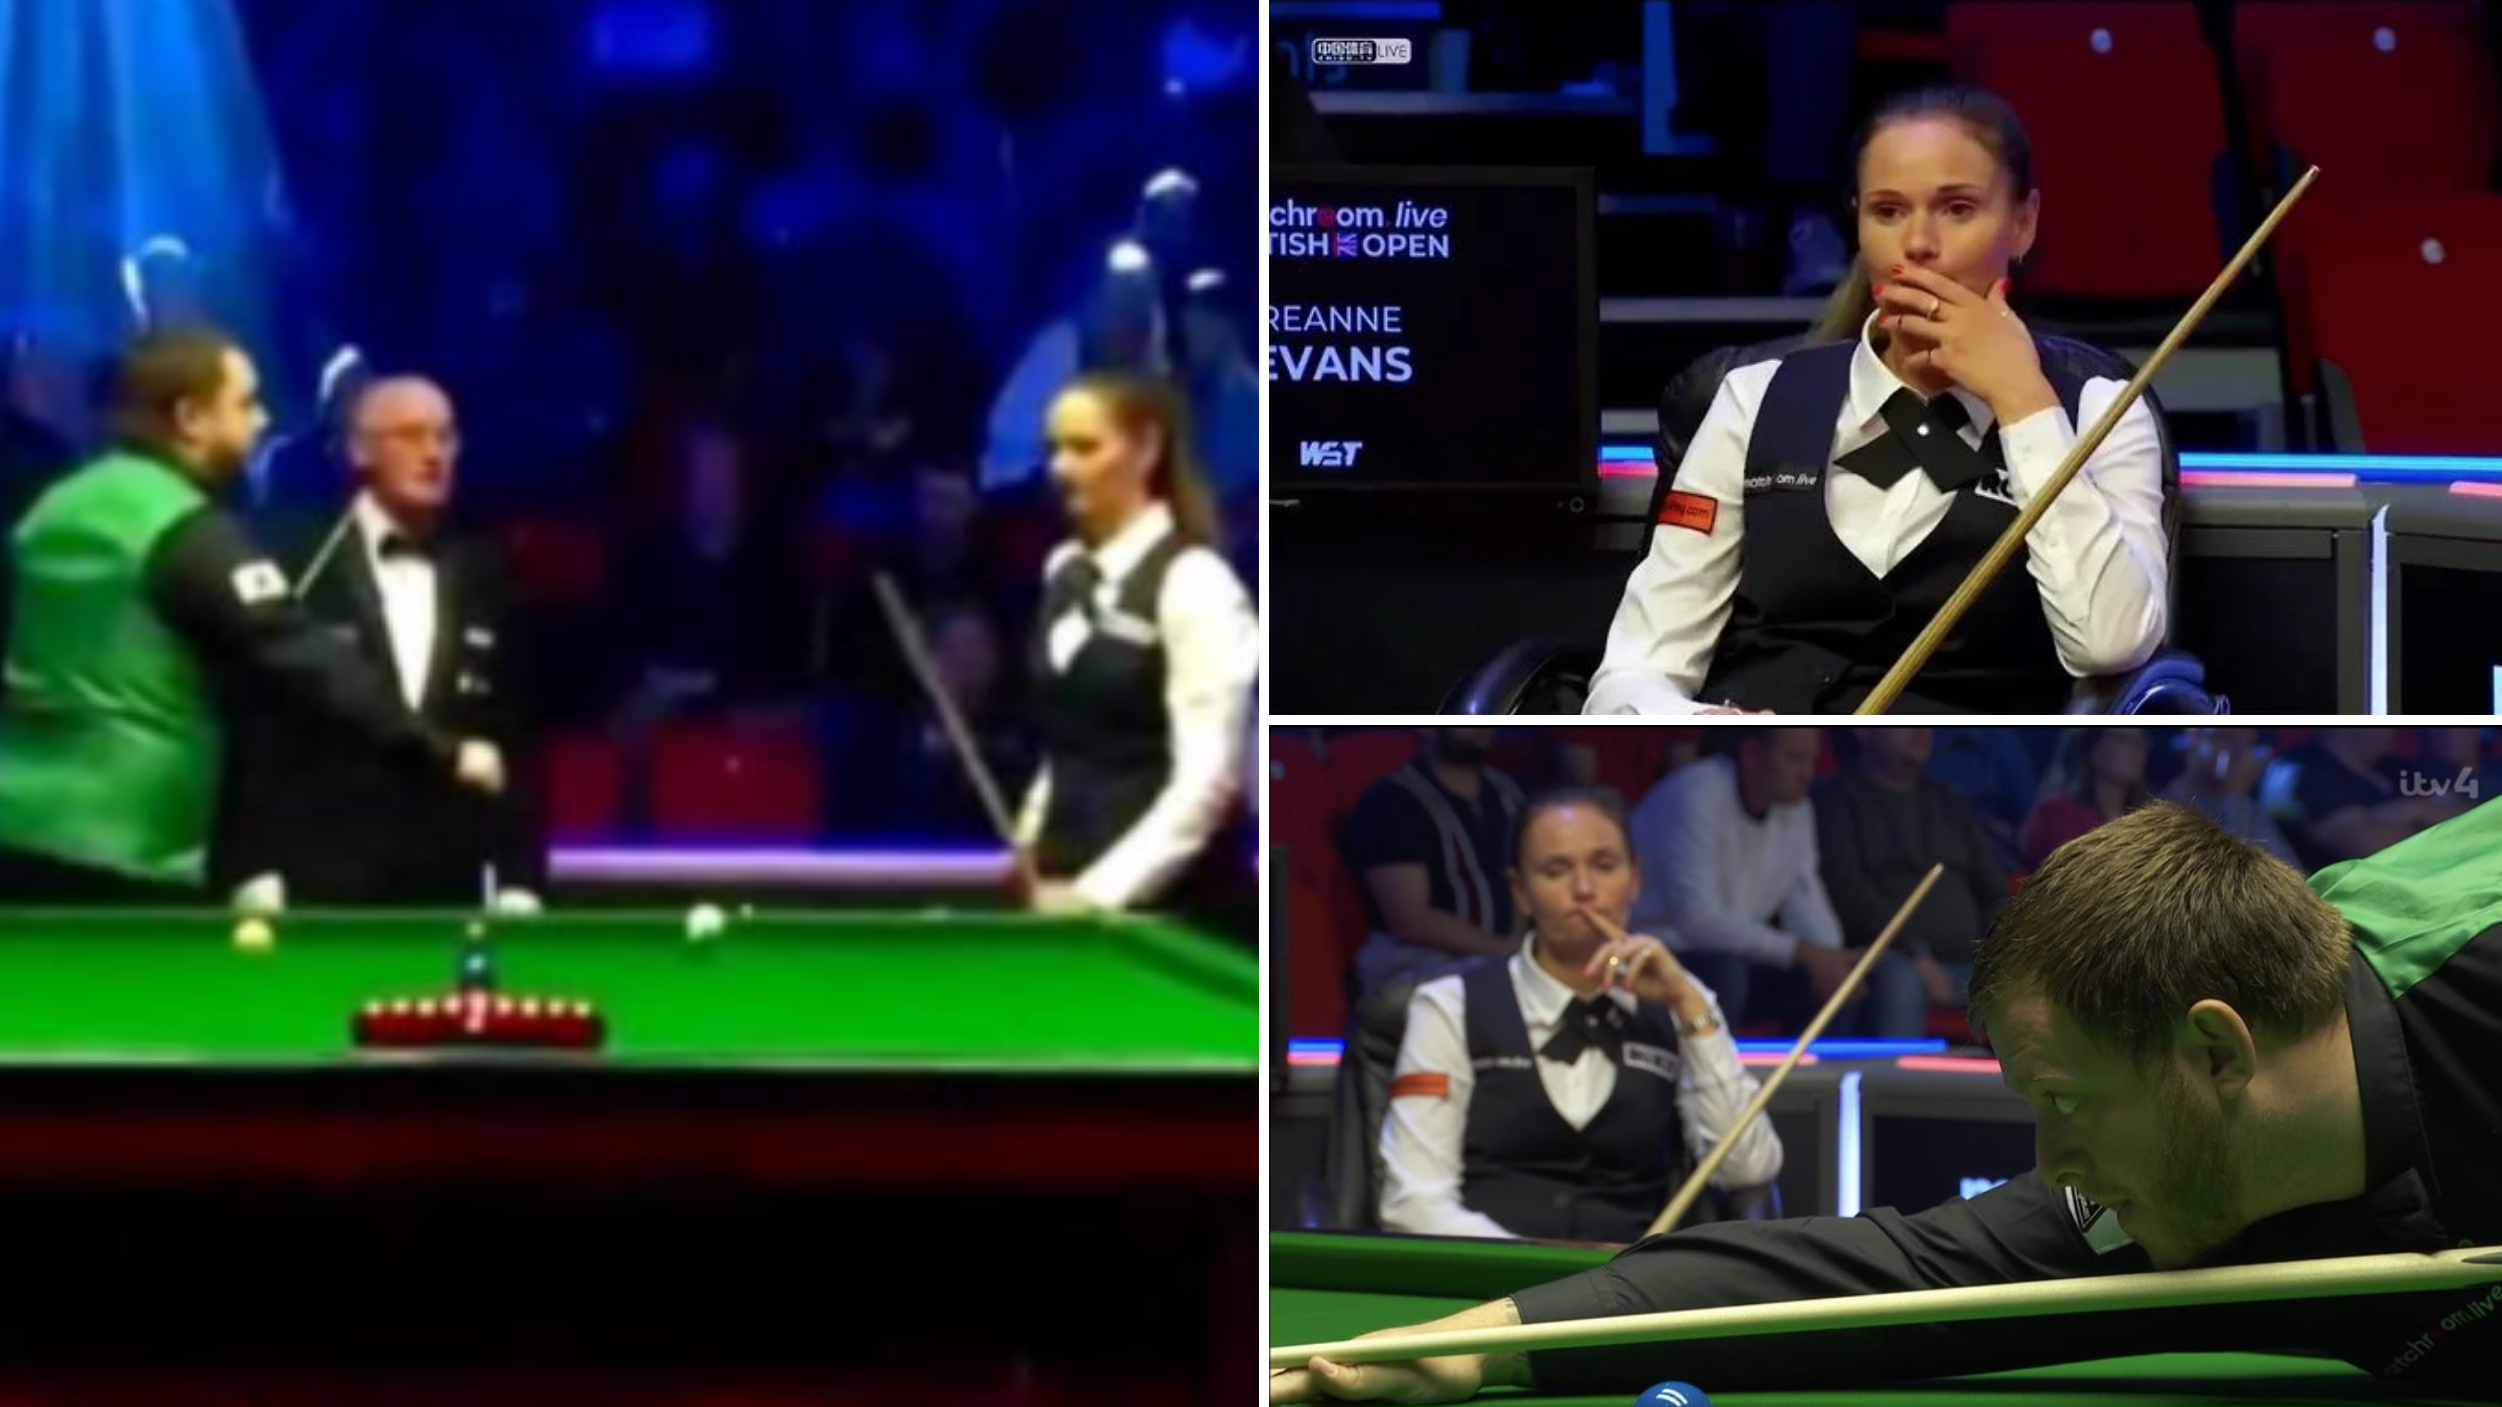 All The Latest Snooker News, Videos and Breaking Stories SPORTbible